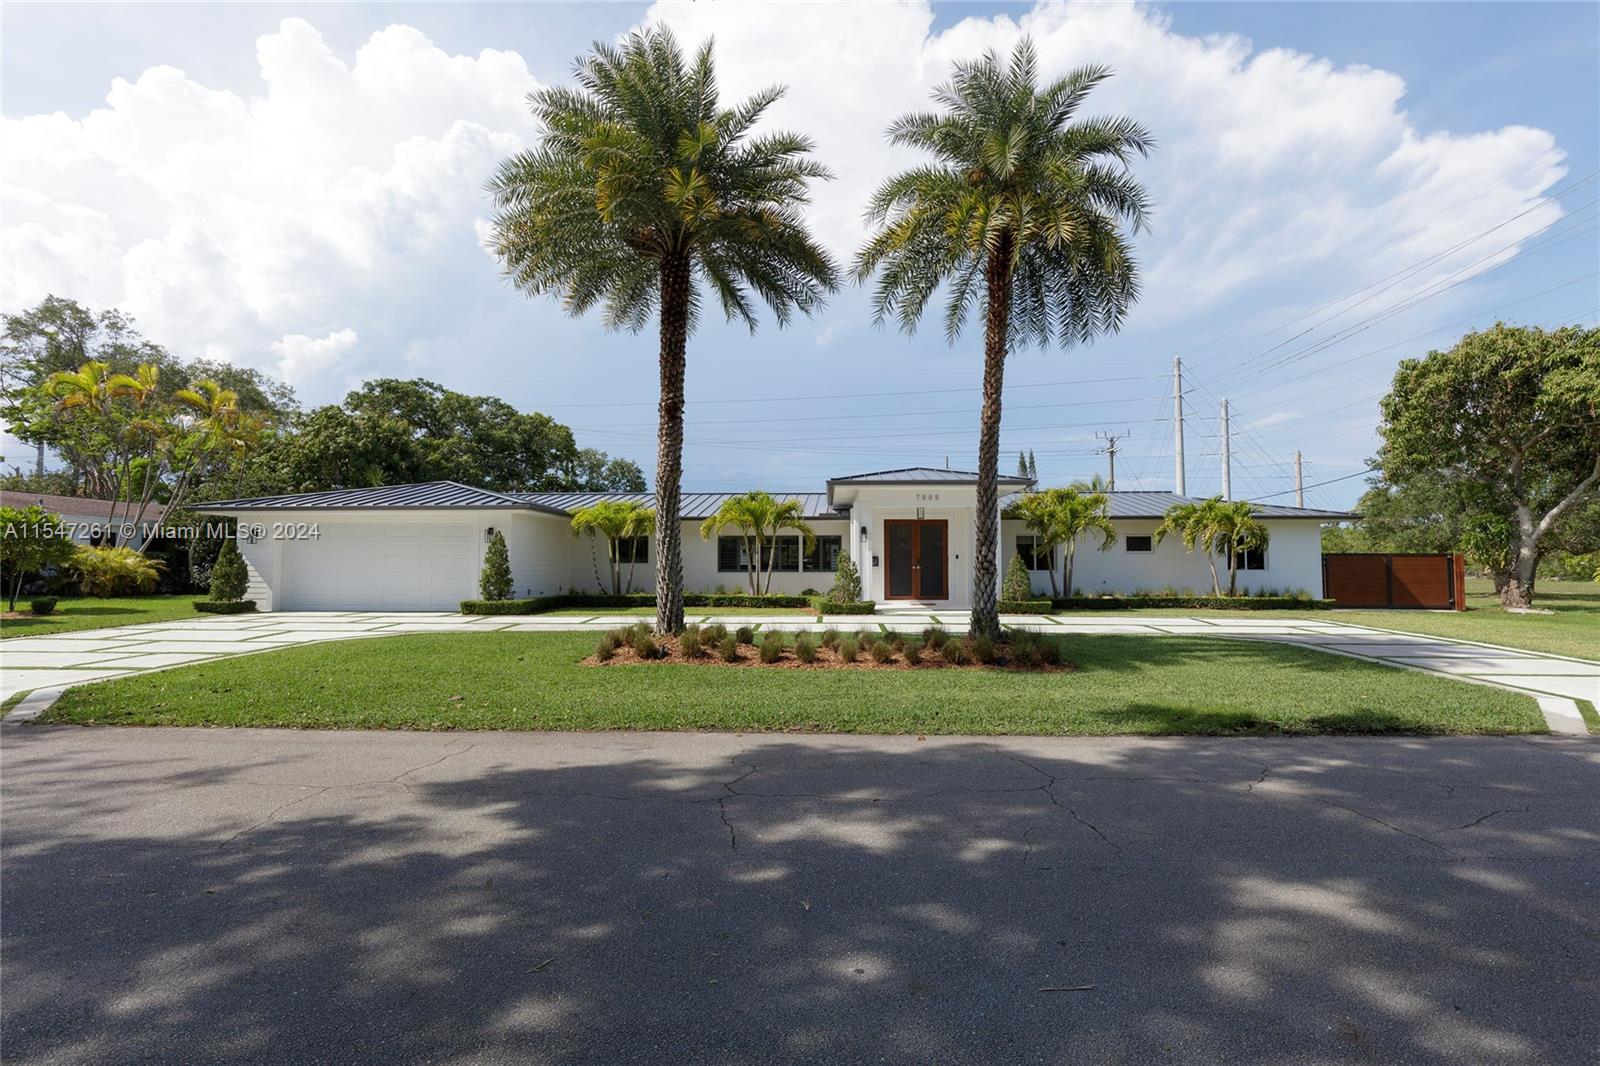 Stunning 5 bdrm/3.5 bath completely remodeled home w/ large addition in late 2021, located in N. Palmetto Bay. Open concept living area, dining rm, chef’s kitchen w/ quartz counters, modern yet warm wood cabinetry, eat-in snack bar, walk-in pantry, all overlooking beautiful views of the backyard. Grand primary suite feat. expansive walk- in closet, luxurious bath w/ wet rm, marble vanity. Ample sized guest rms; one en-suite & jack & jill style bdrms. Indoor laundry rm, mud rm. Smart home w/ surround sound, lighting, security. New roof, PVC plumbing, impact windows/doors. Sprawling, oversized, fenced backyard w/ pool, covered patio & fantastic summer kitchen. 2 car garage, architectural paver driveway & space to park a boat on the side. Near the best schools, Falls shopping, restaurants.